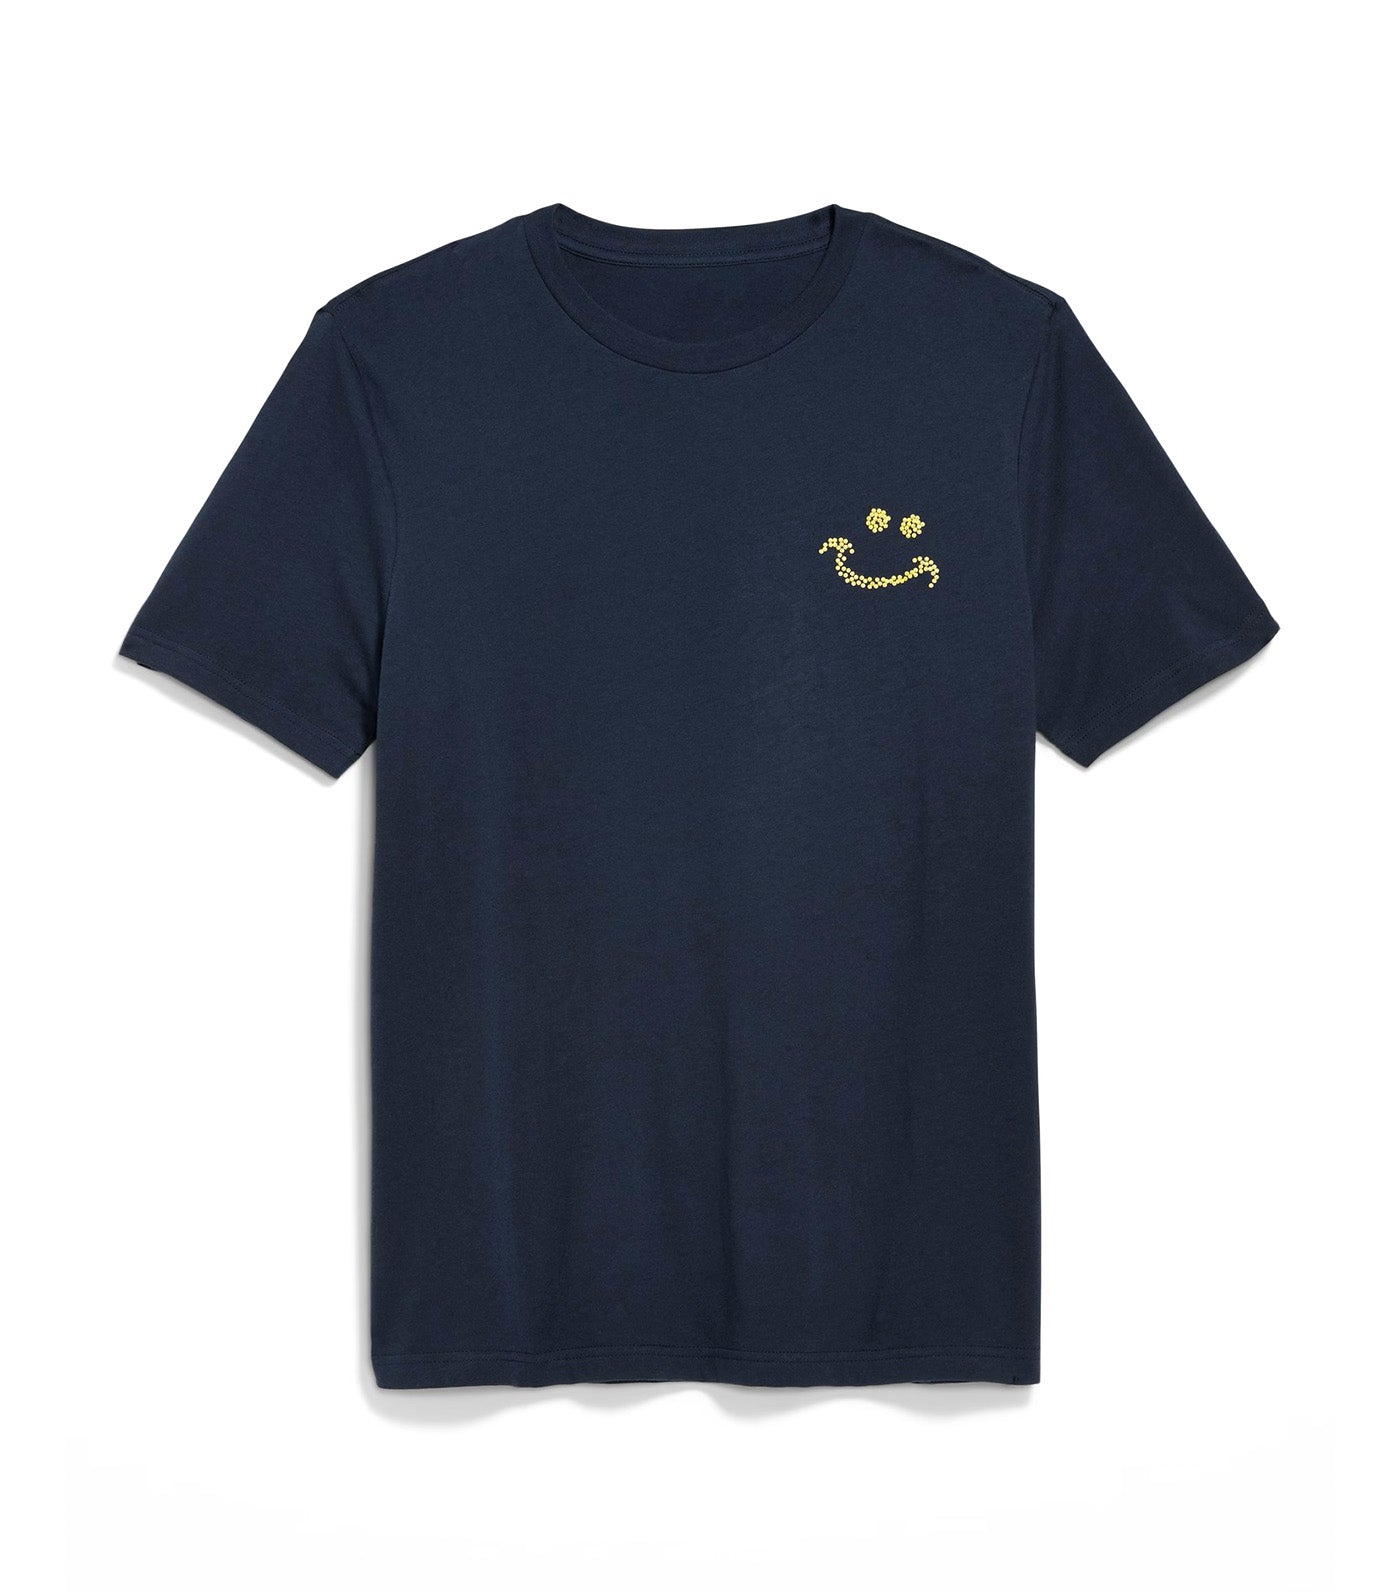 Graphic T-Shirt for Men In The Navy